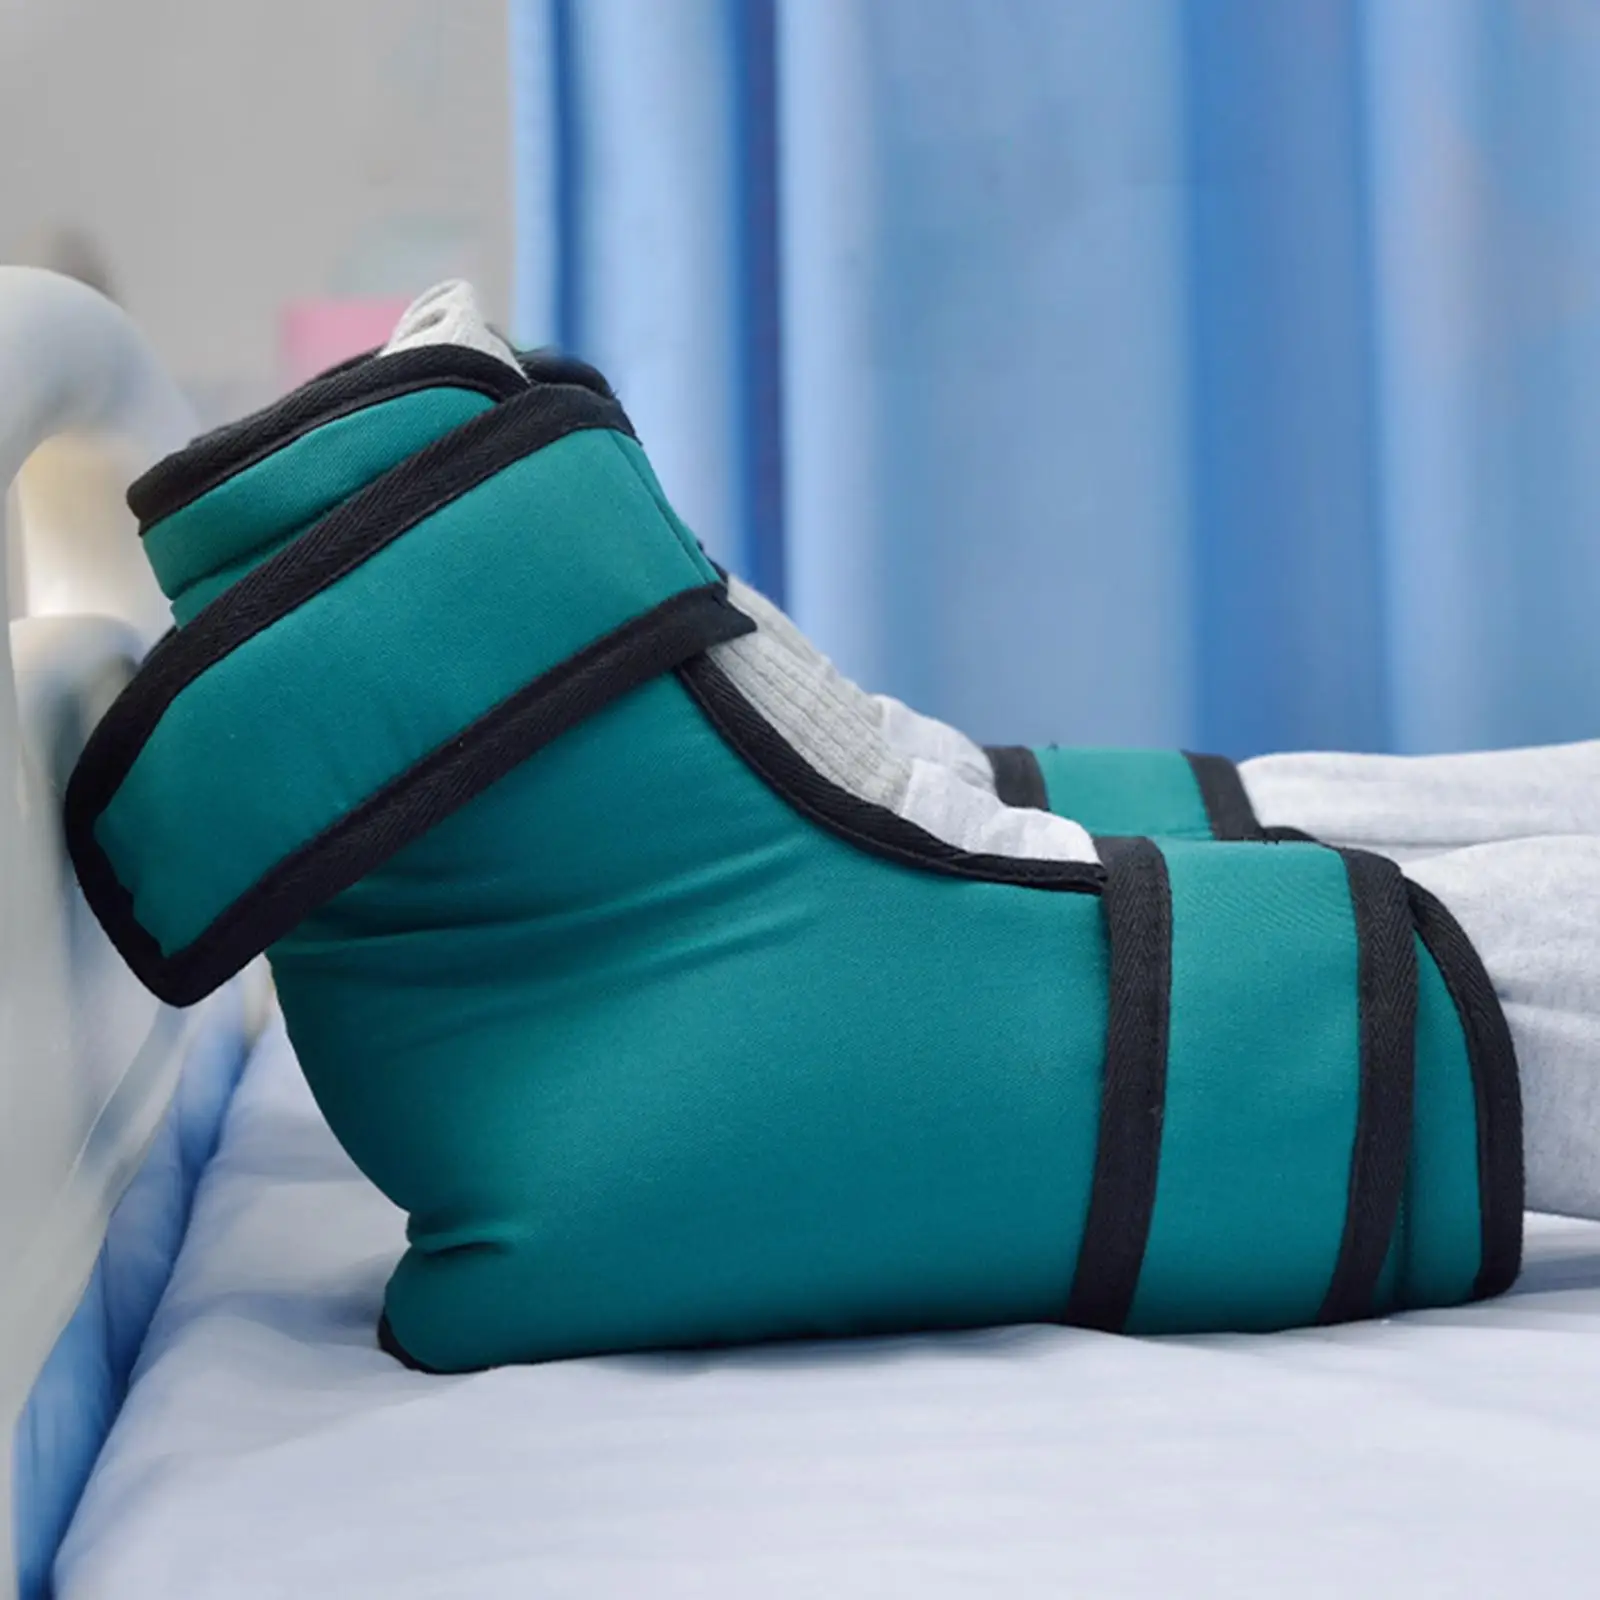   for  Pressure , Cushioned Boot for Elevated  Support, Designed for Bed Bound Individuals